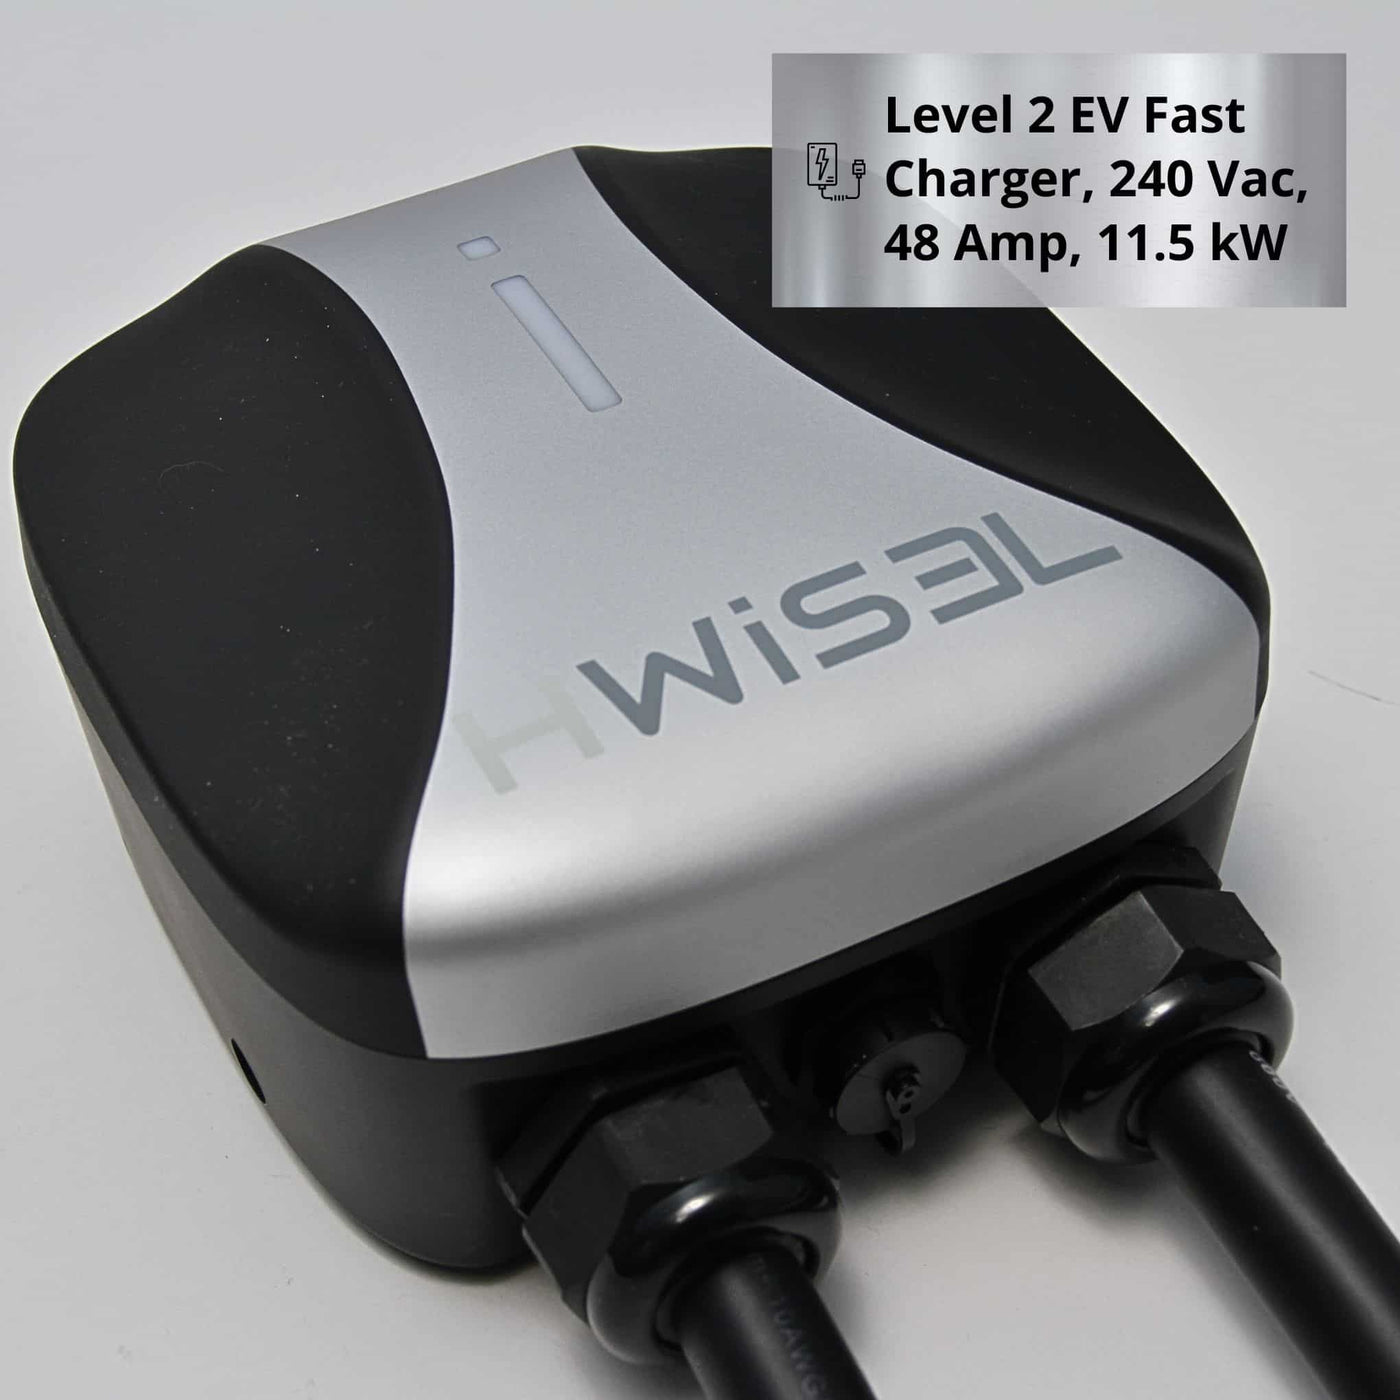 Charger Plus Plan_HWisel HEVC19 Smart Charging Station Image Level 2 Fast Charger 240 Vac, 48 amp, 11.5 kW Image Size 2040x2040